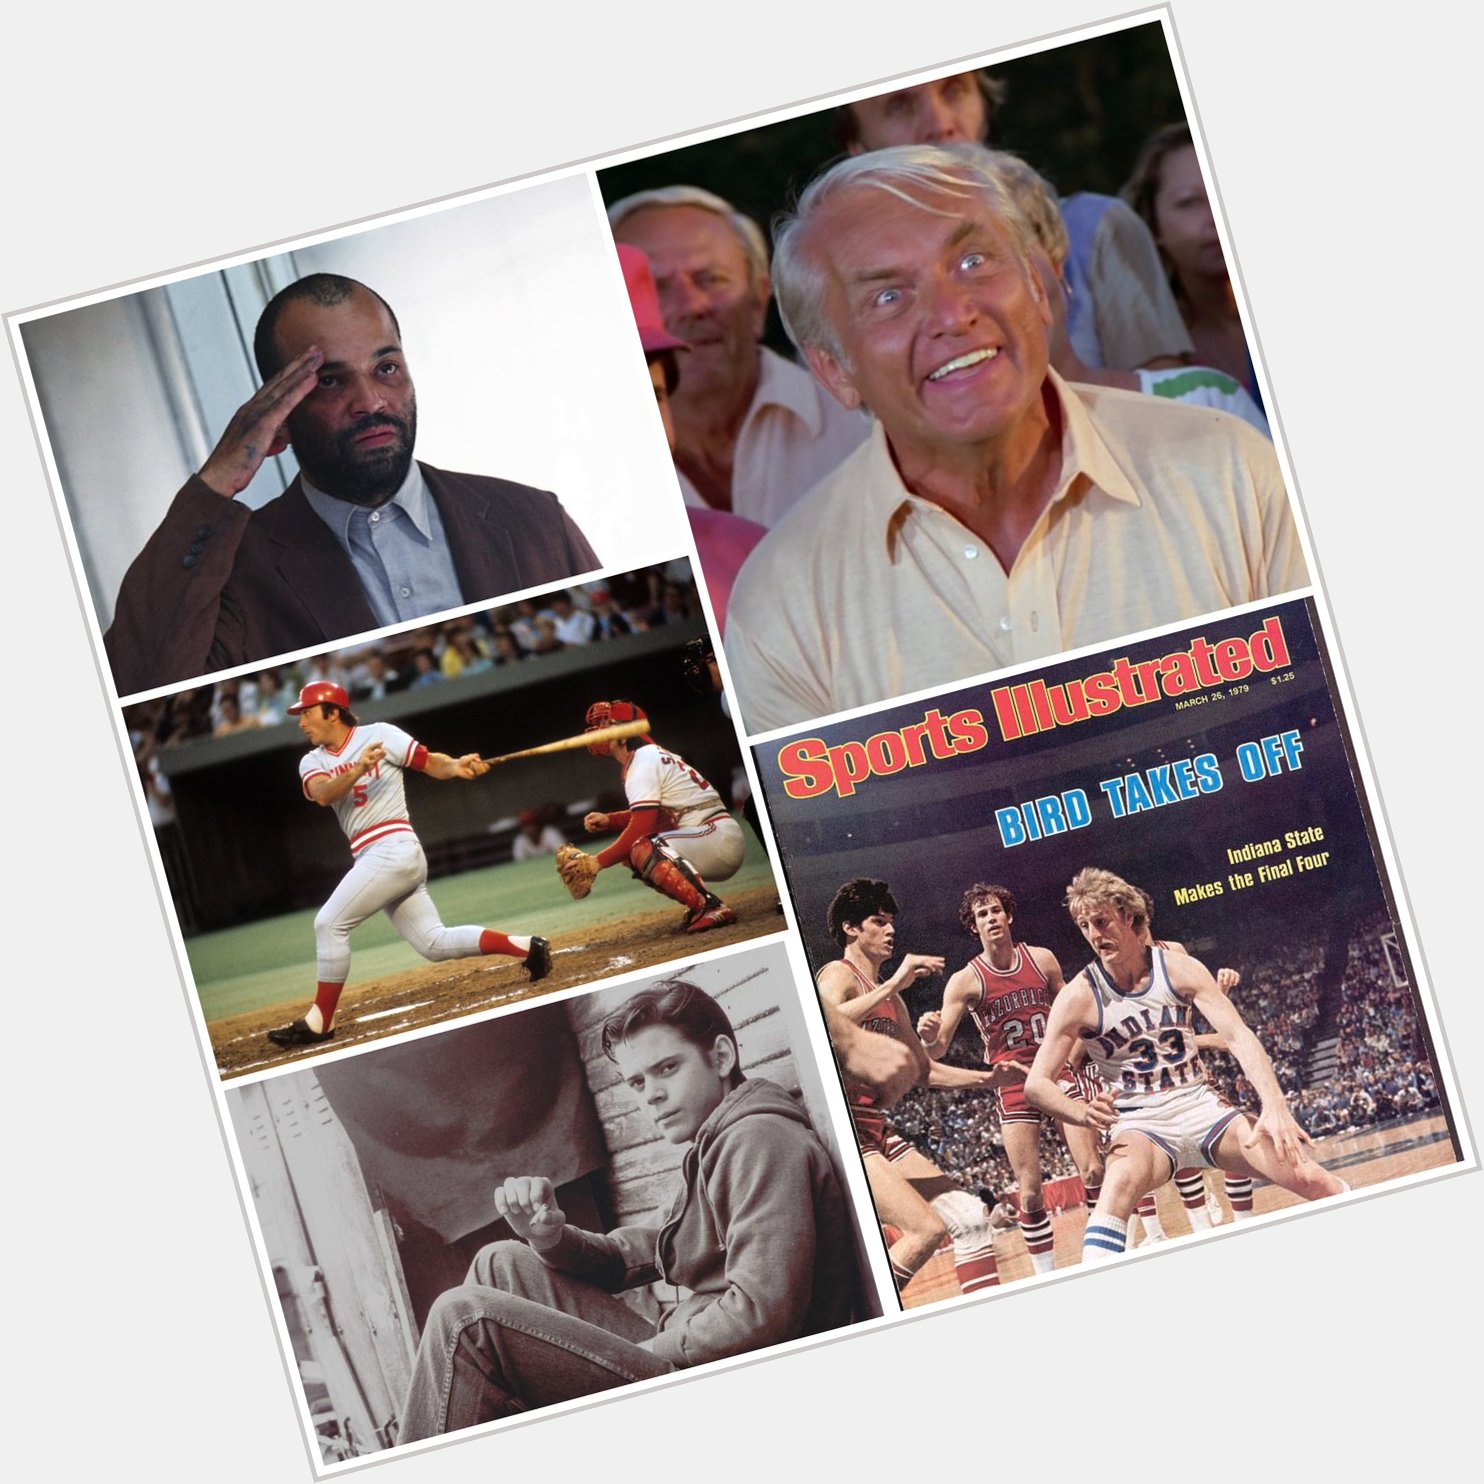 Happy Birthday to 

Jeffrey Wright 
Johnny Bench 
C. Thomas Howell 
Larry Bird 
The late great Ted Knight 